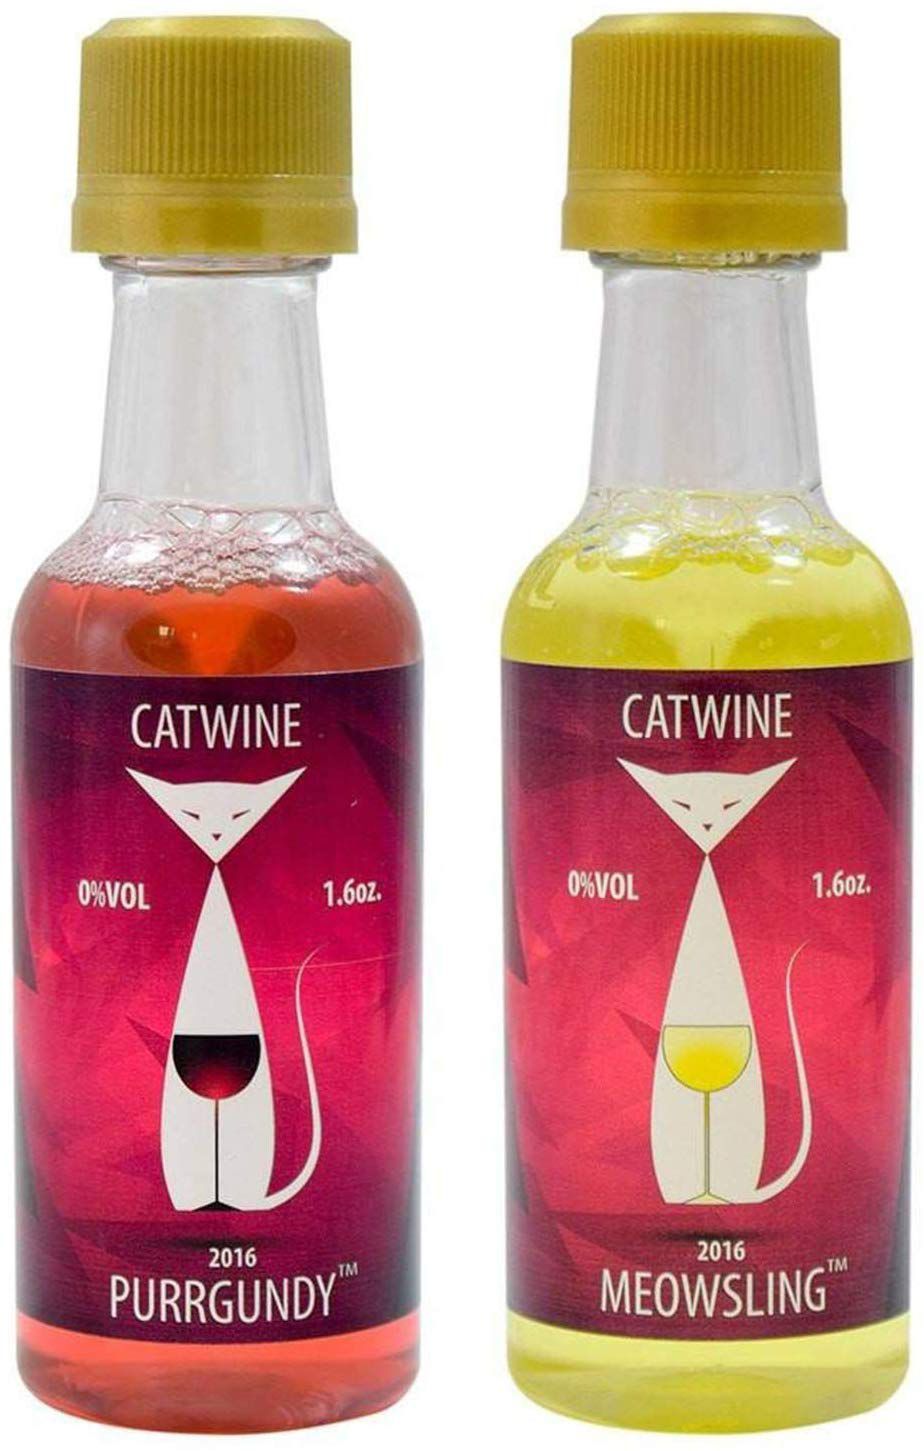 bottles of Catwine